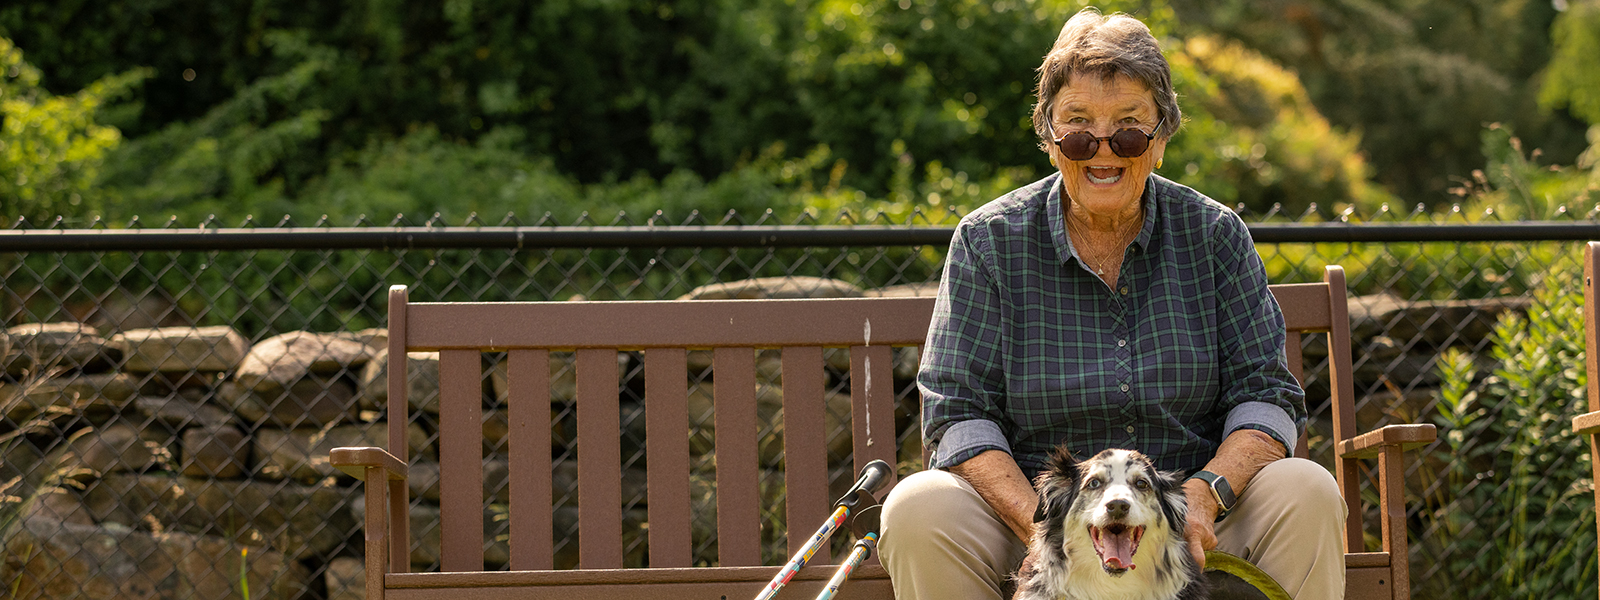 senior lady sitting on a bench with her dog